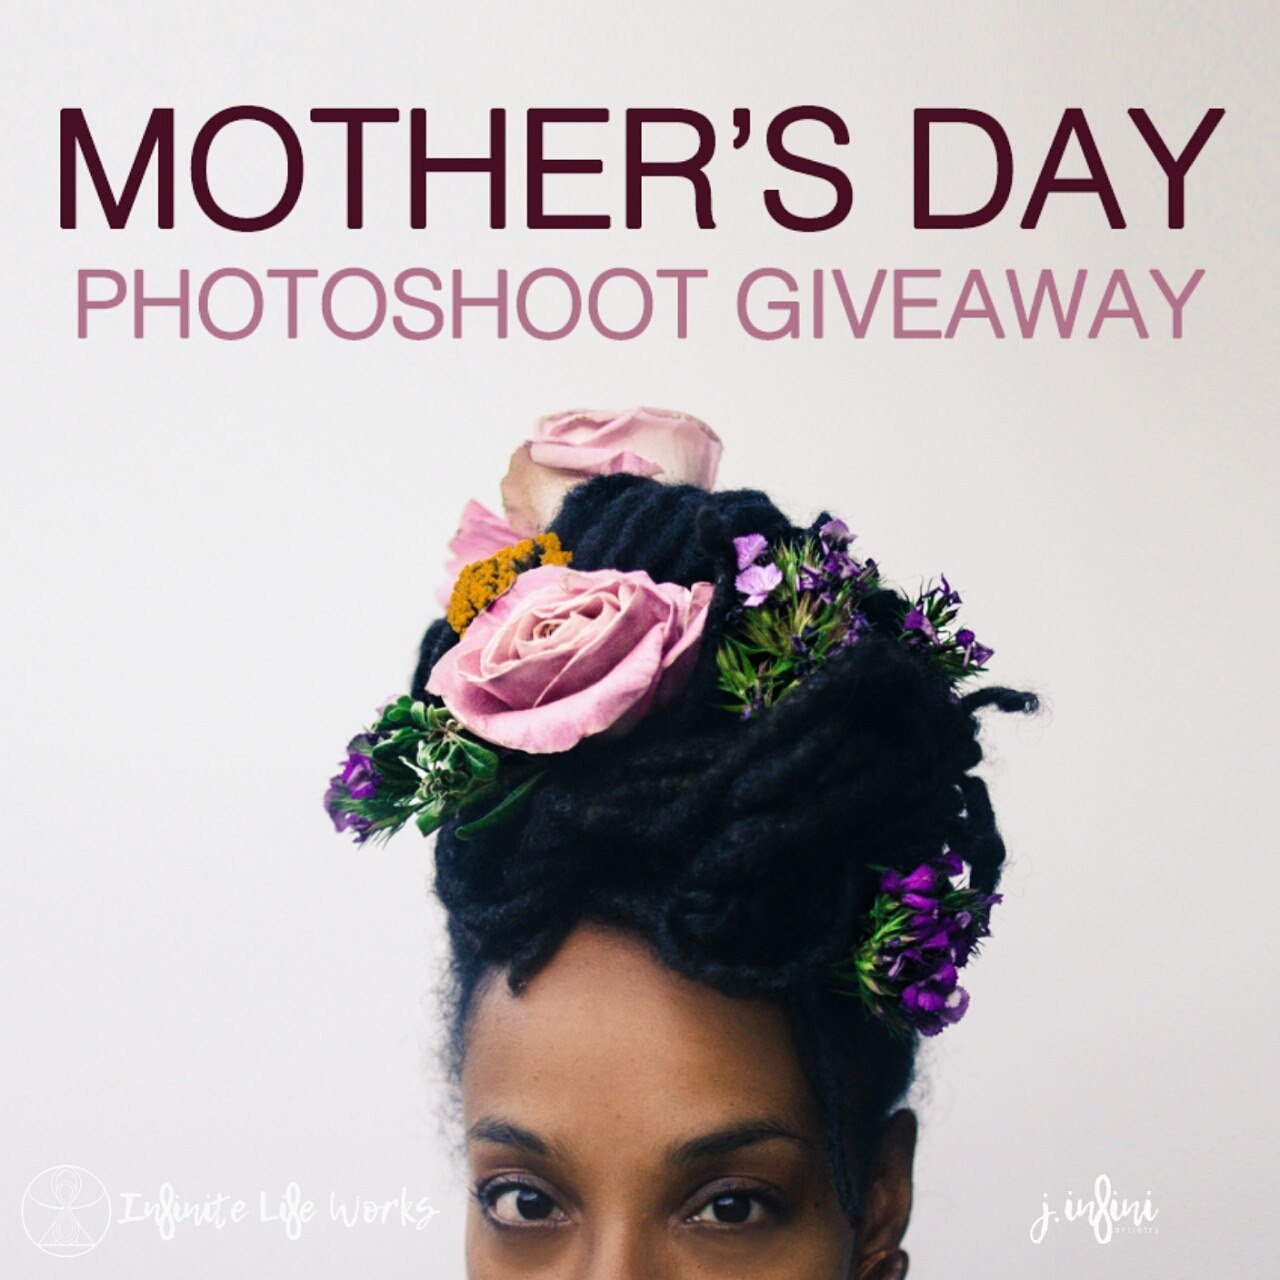 Mother’s Day Photoshoot Giveaway